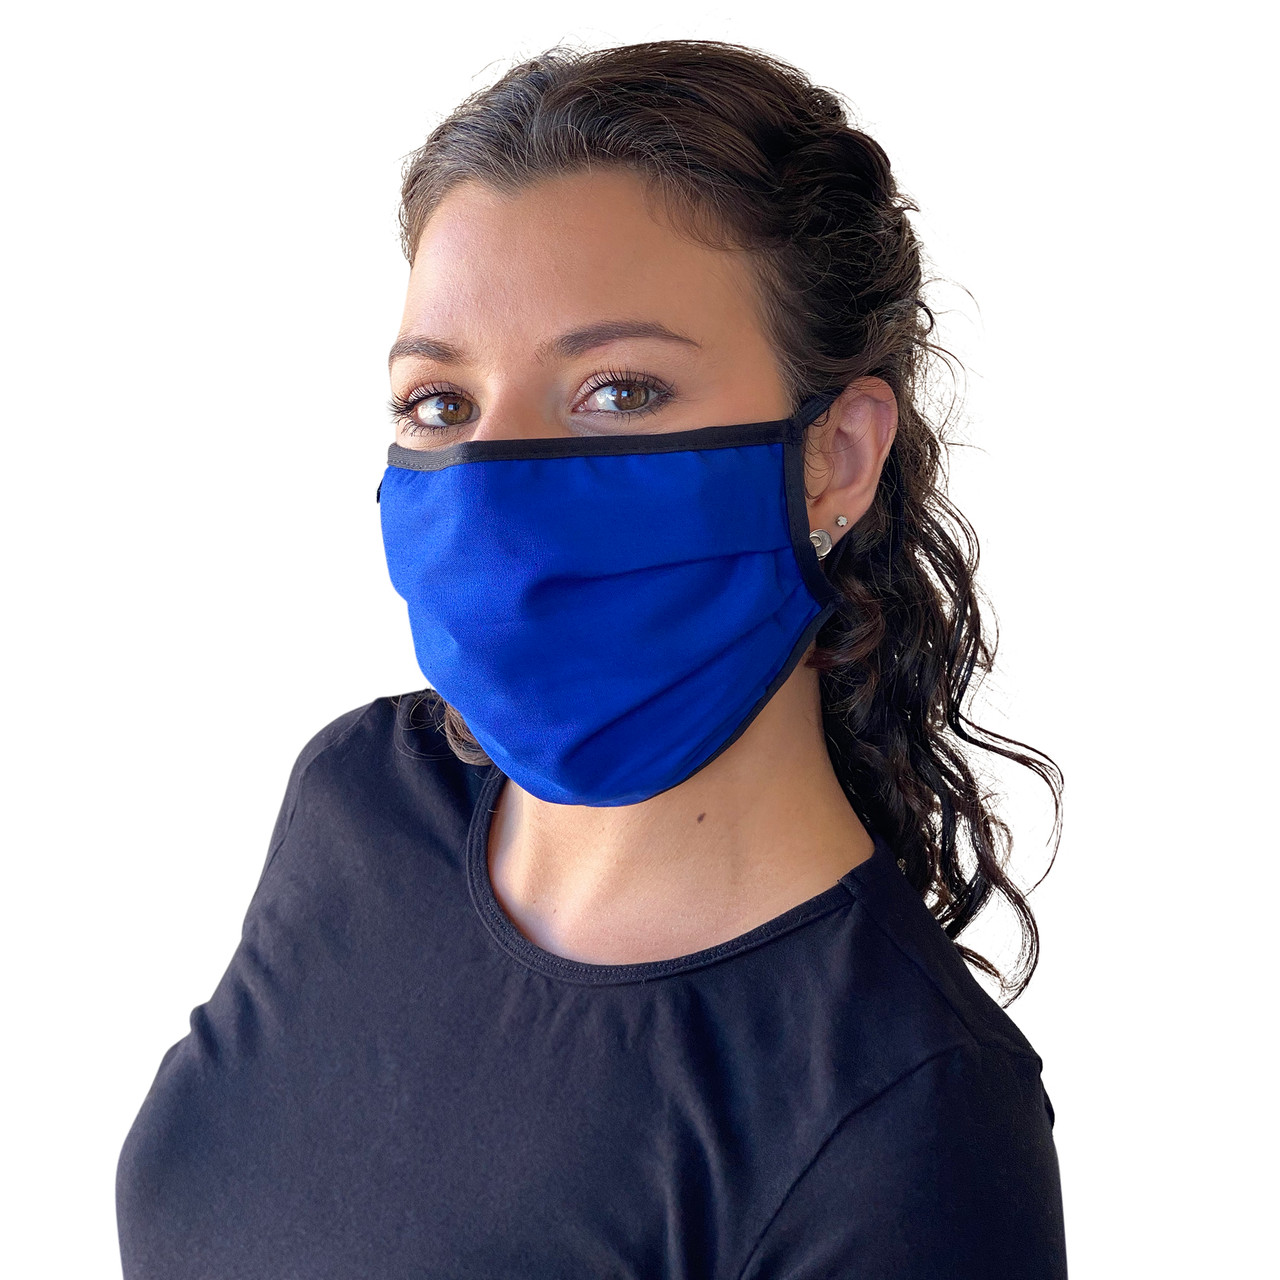 Washable Face Mask Reusable Blue Cotton Cloth Adjustable Fit, 2-Ply - Made  in USAde